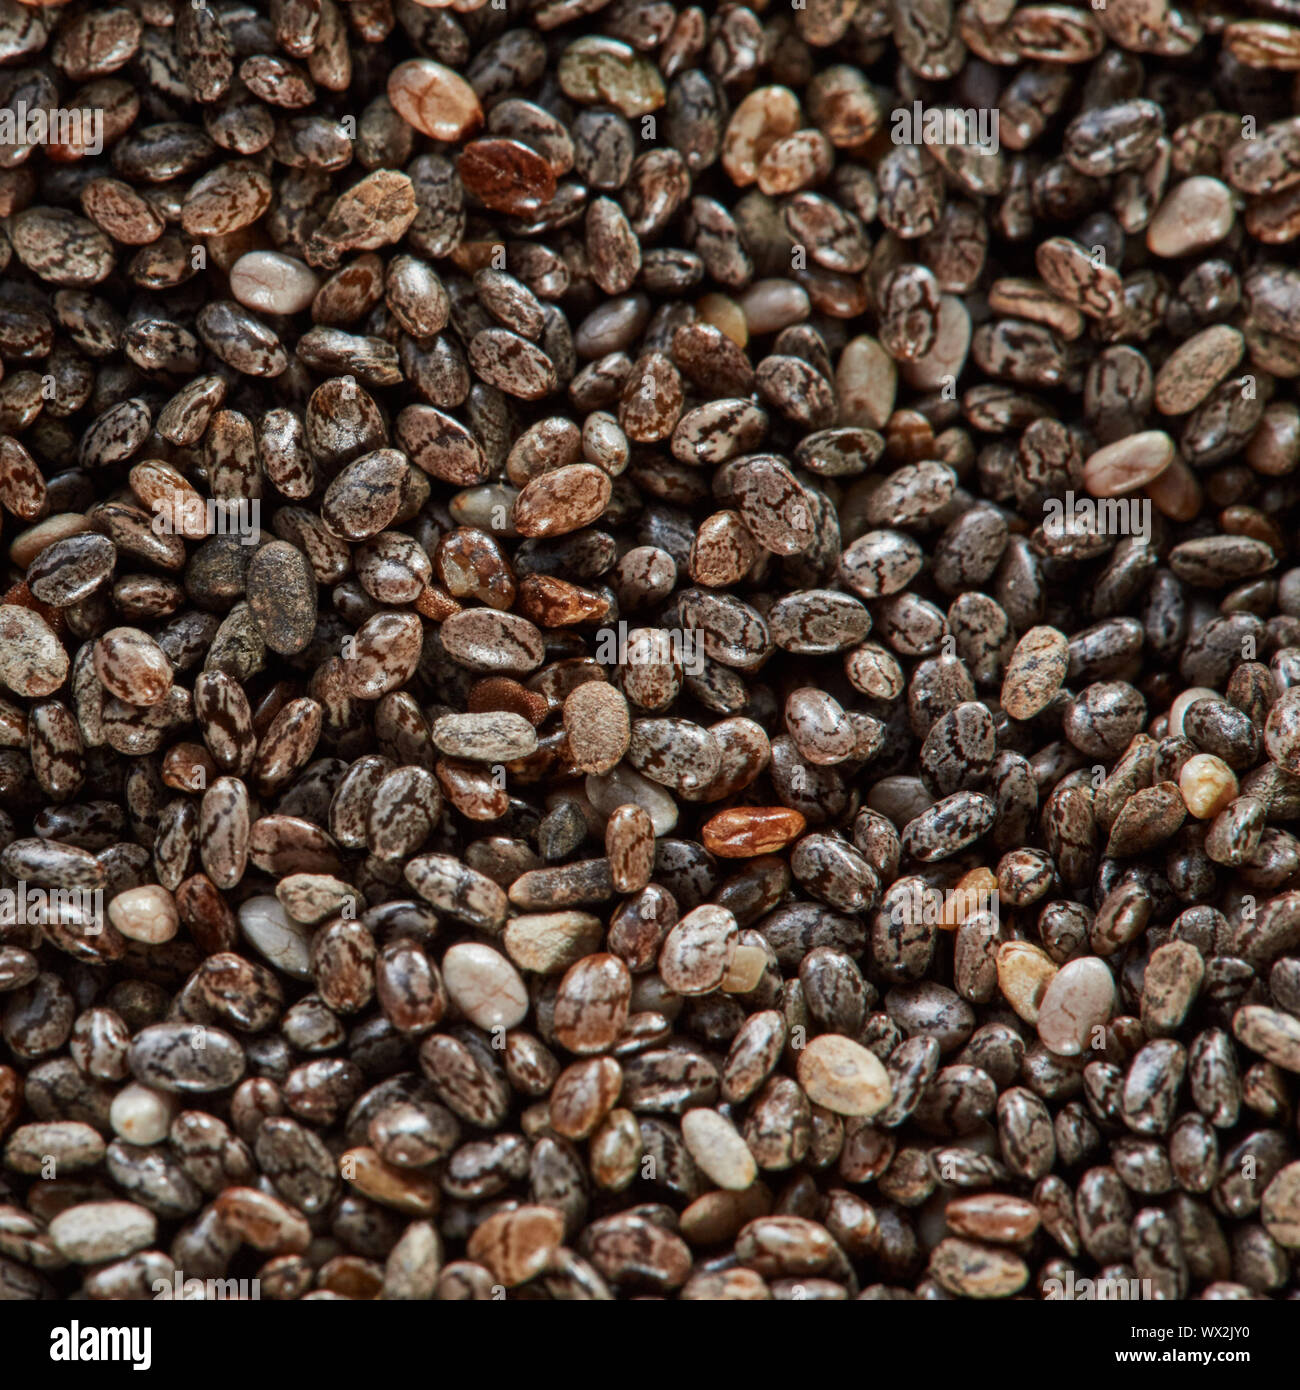 Texture of natural organic seeds of linen. Healthy raw superfood background close-up from linseed. Flat lay Stock Photo